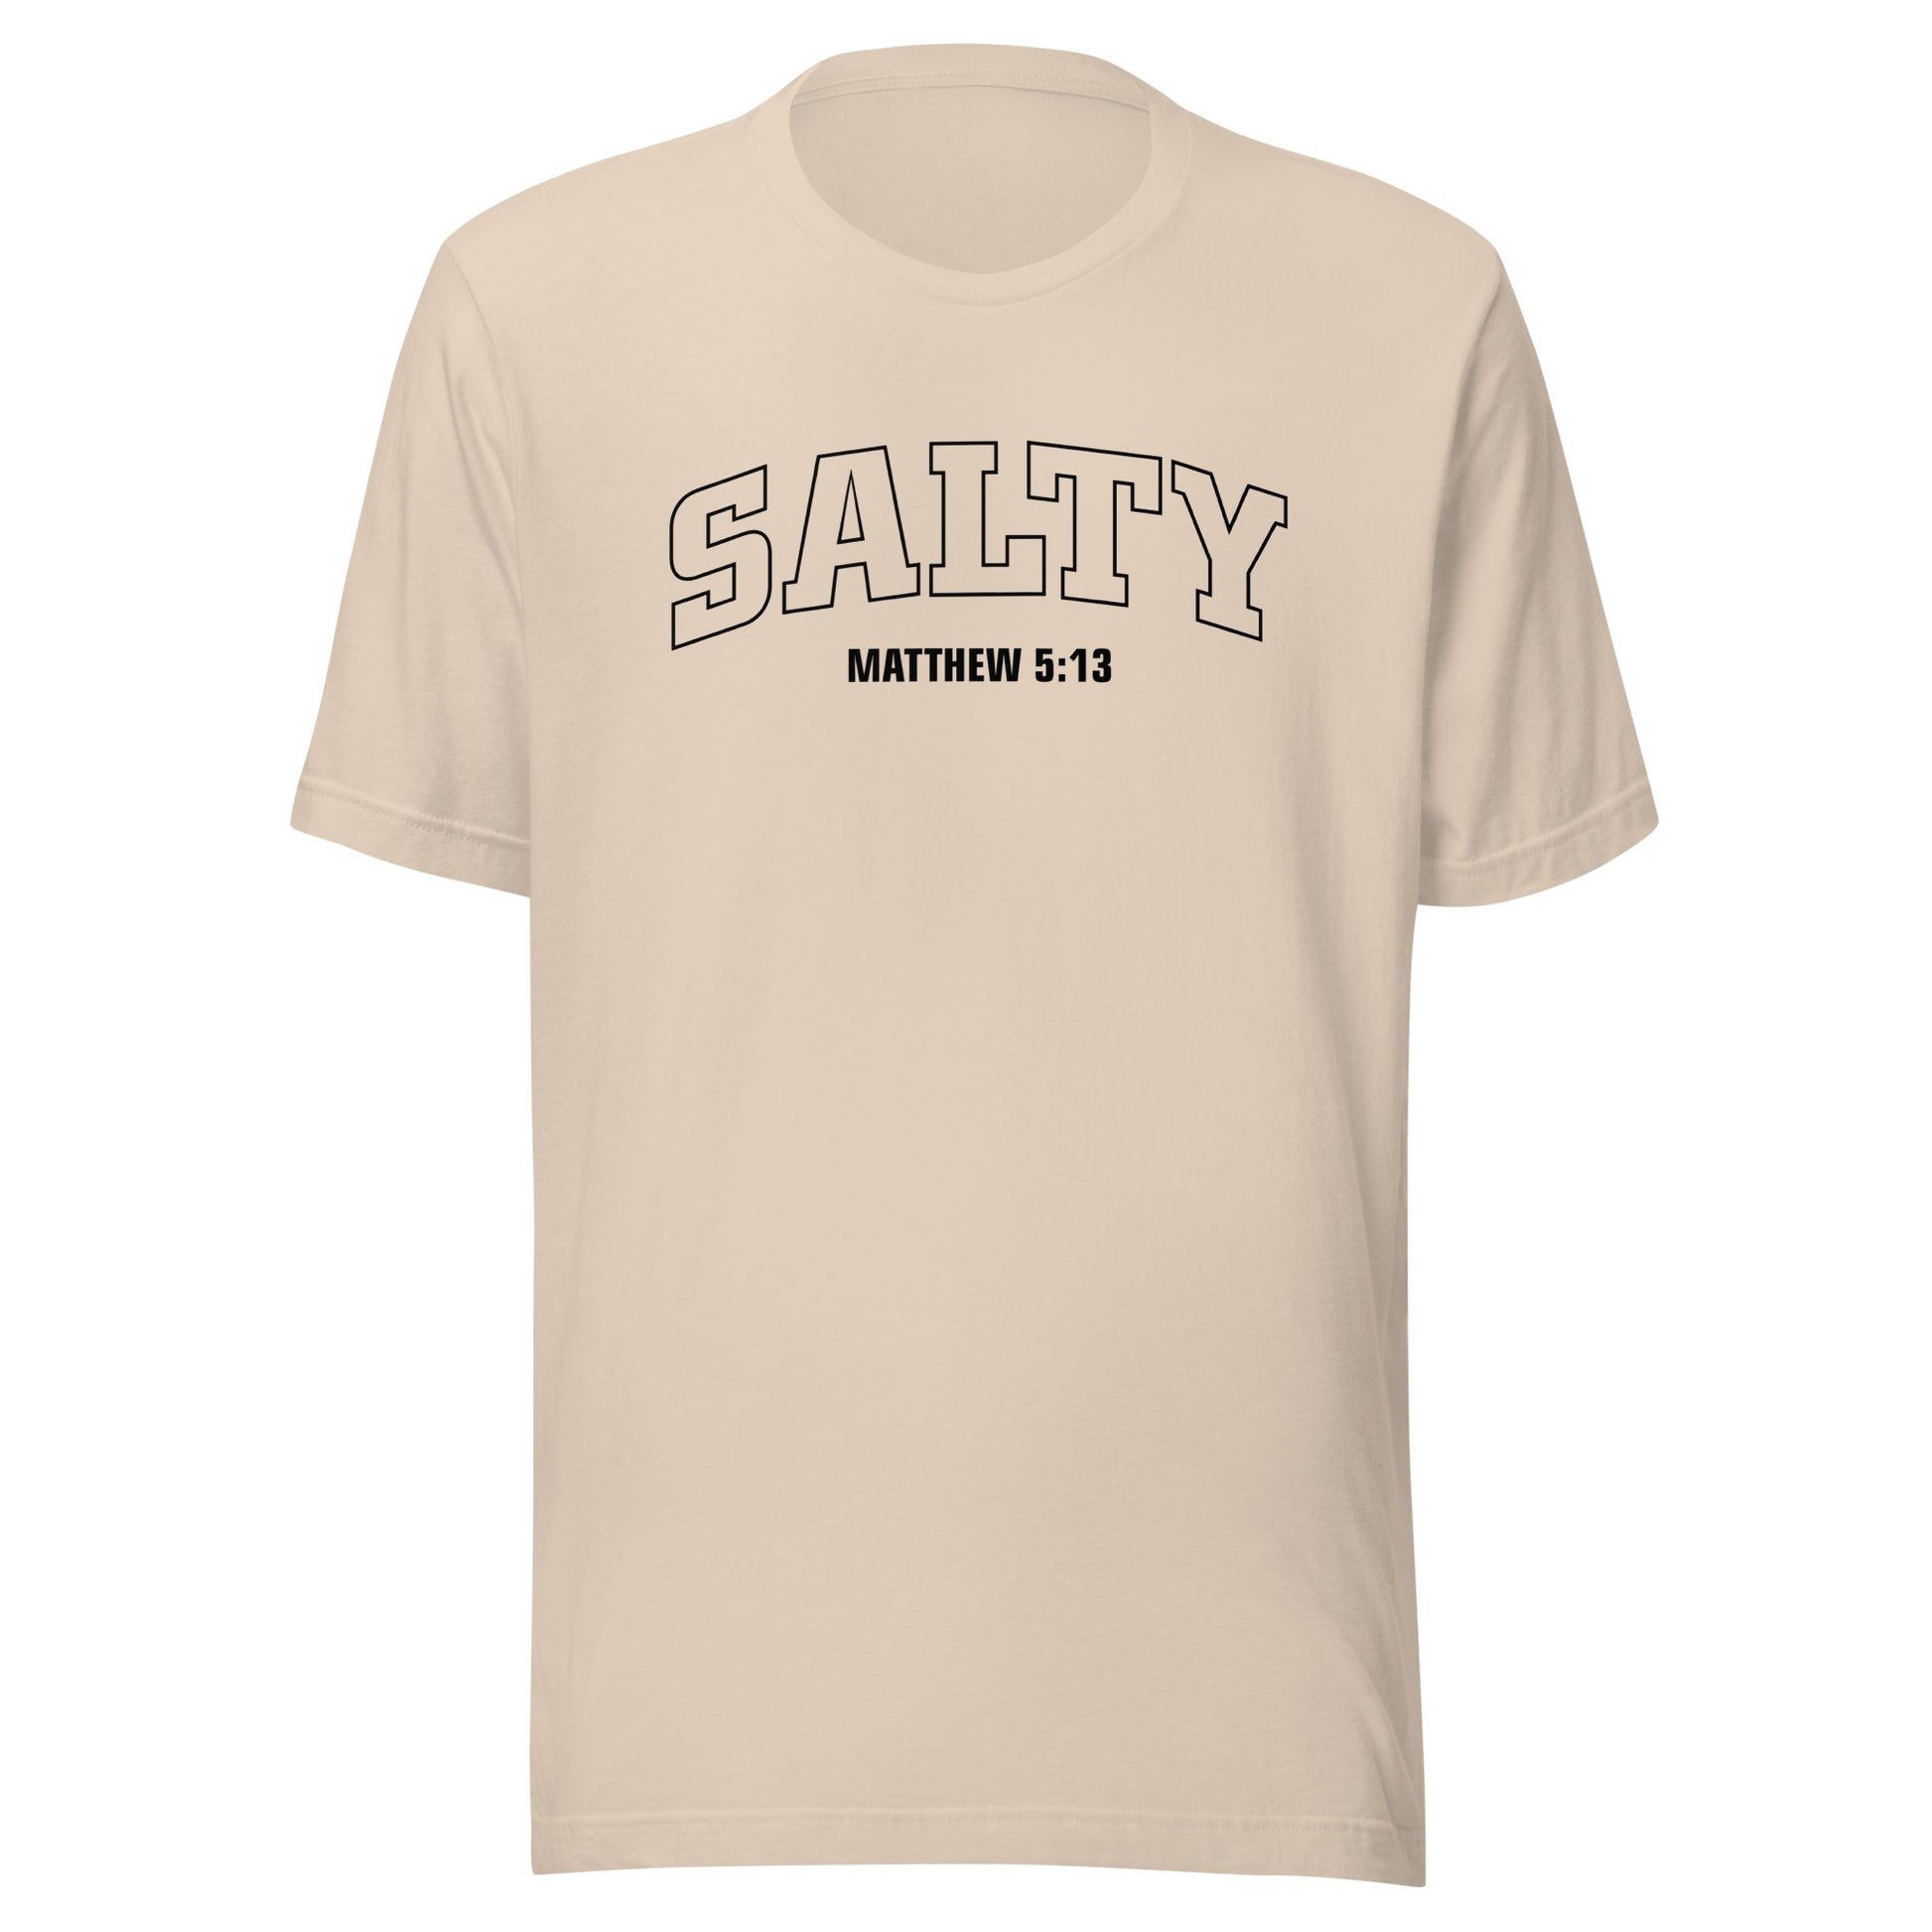 SALTY Matthew 5:13 T-shirt in Soft Cream with Black lettering